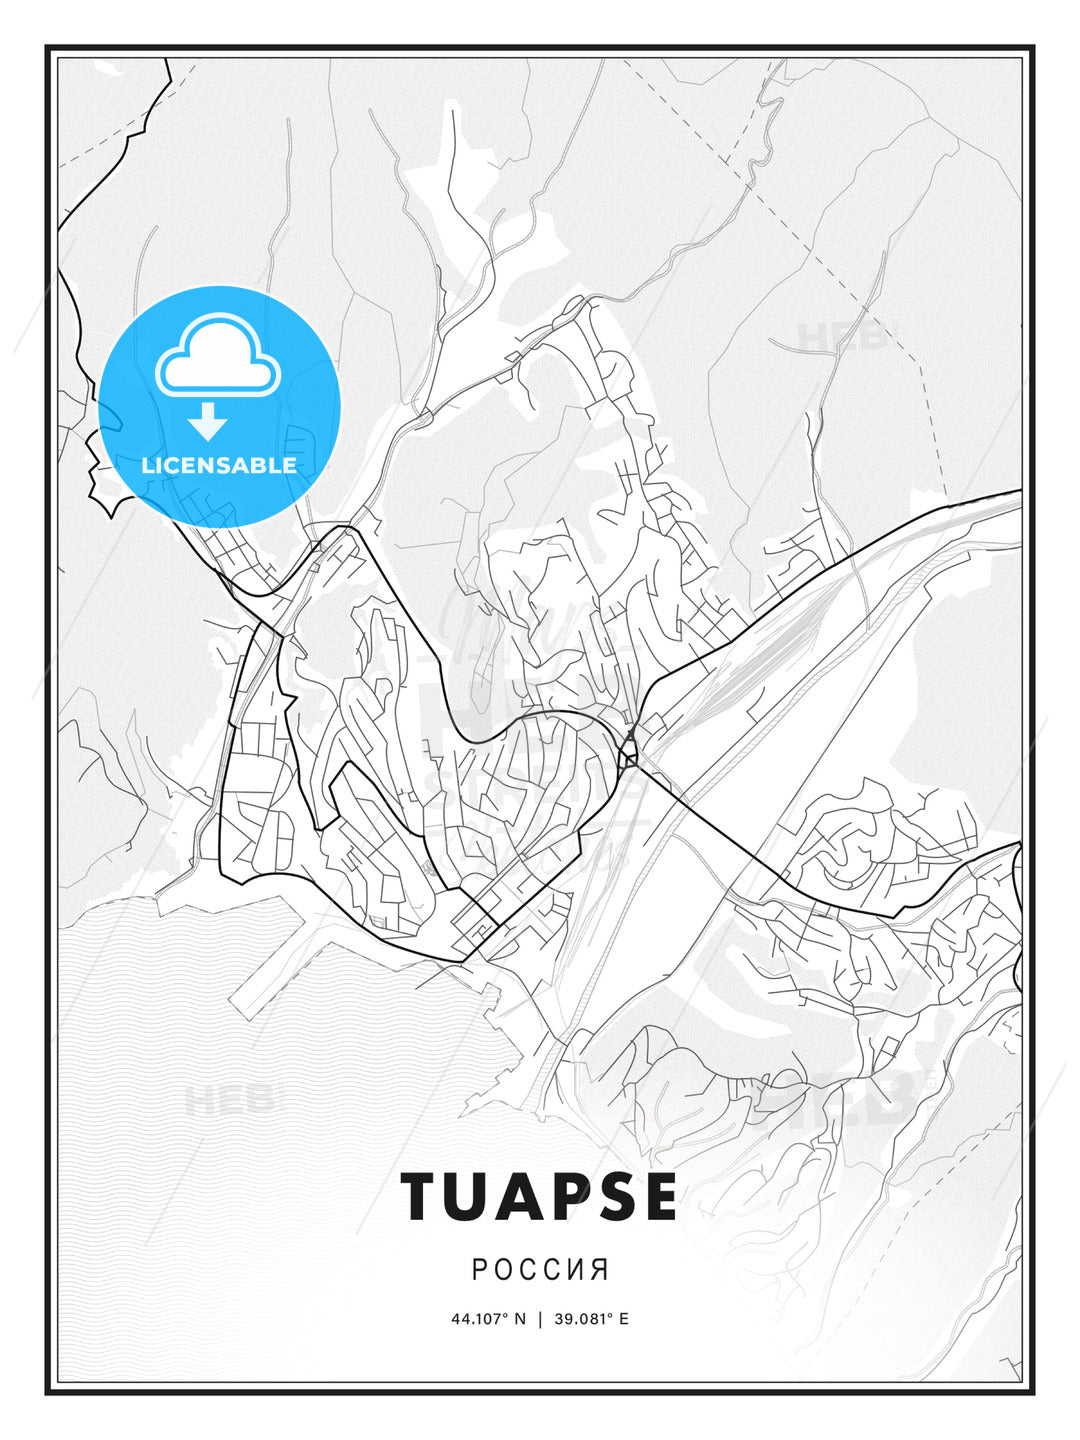 Tuapse, Russia, Modern Print Template in Various Formats - HEBSTREITS Sketches